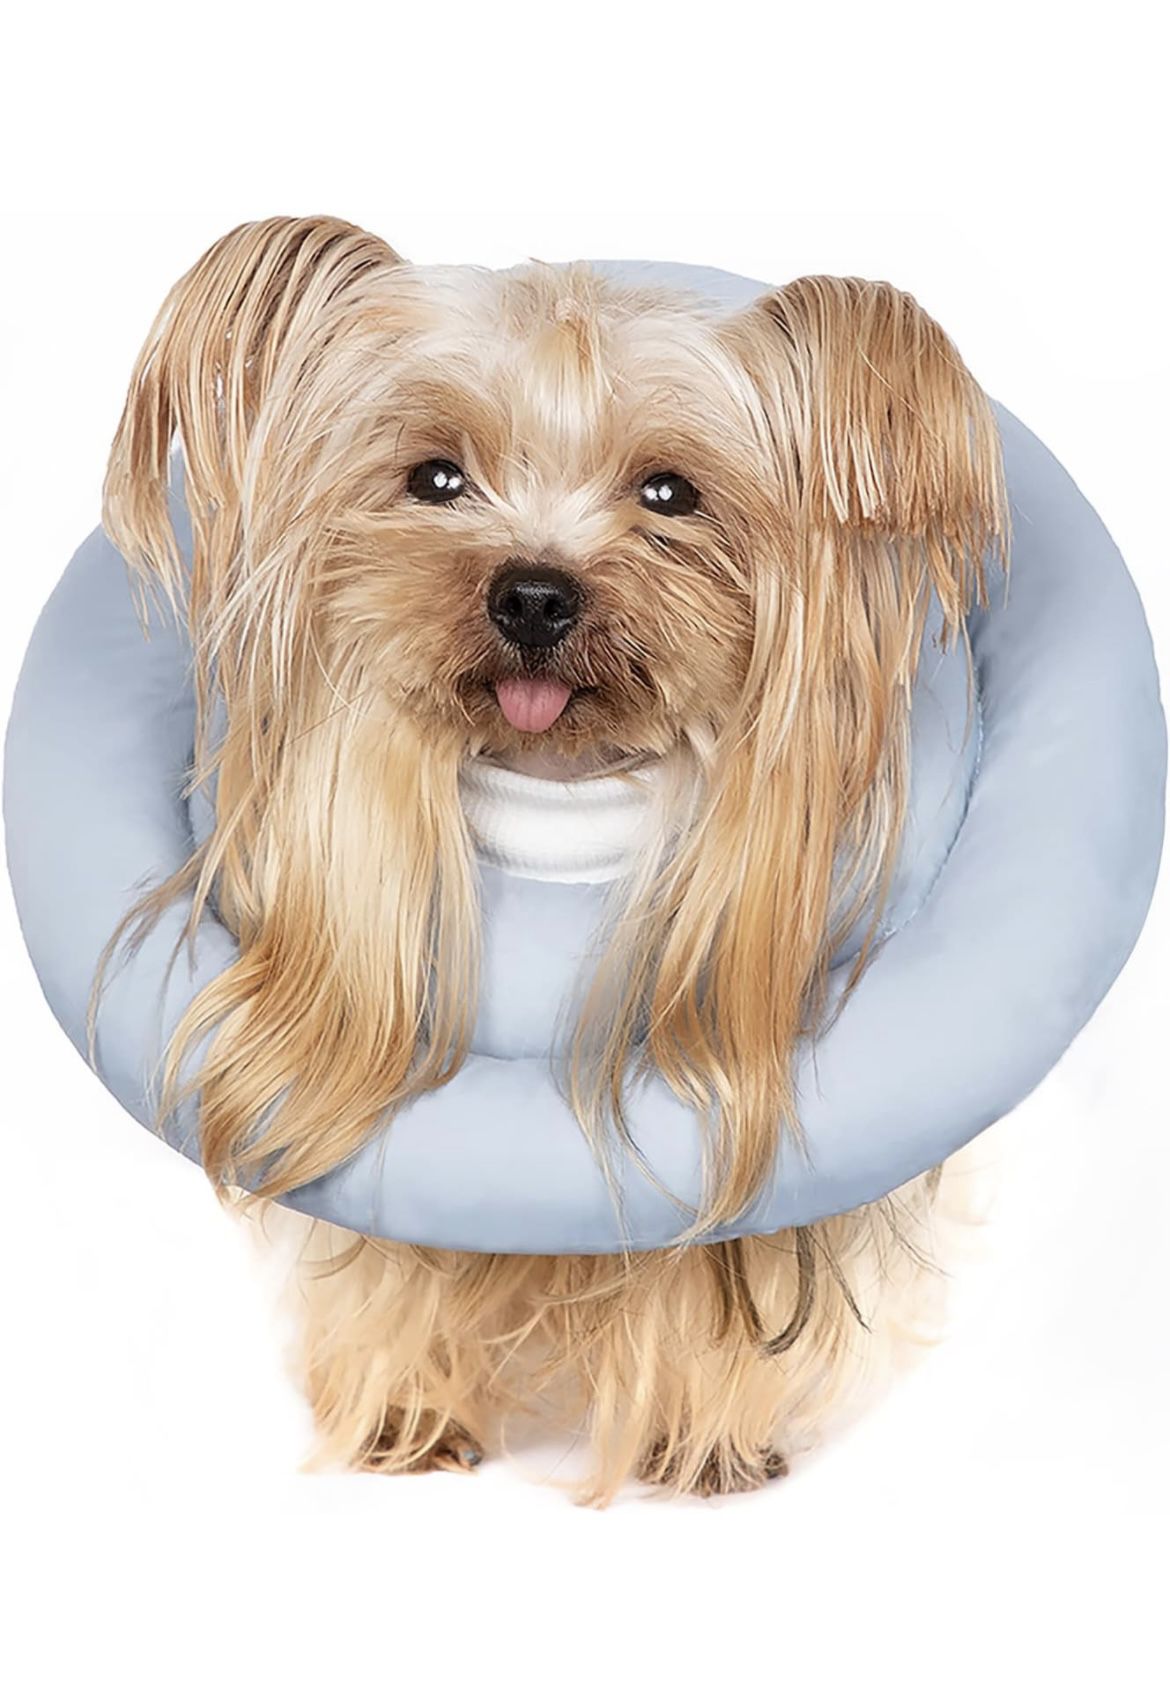 Gagabody Dog Cones for Small Dogs,Comfortable Adjustable Soft Dog Cone Alternative After Surgery,Elizabethan Donut Collar for Small Dogs✅NEW• Size: M✅